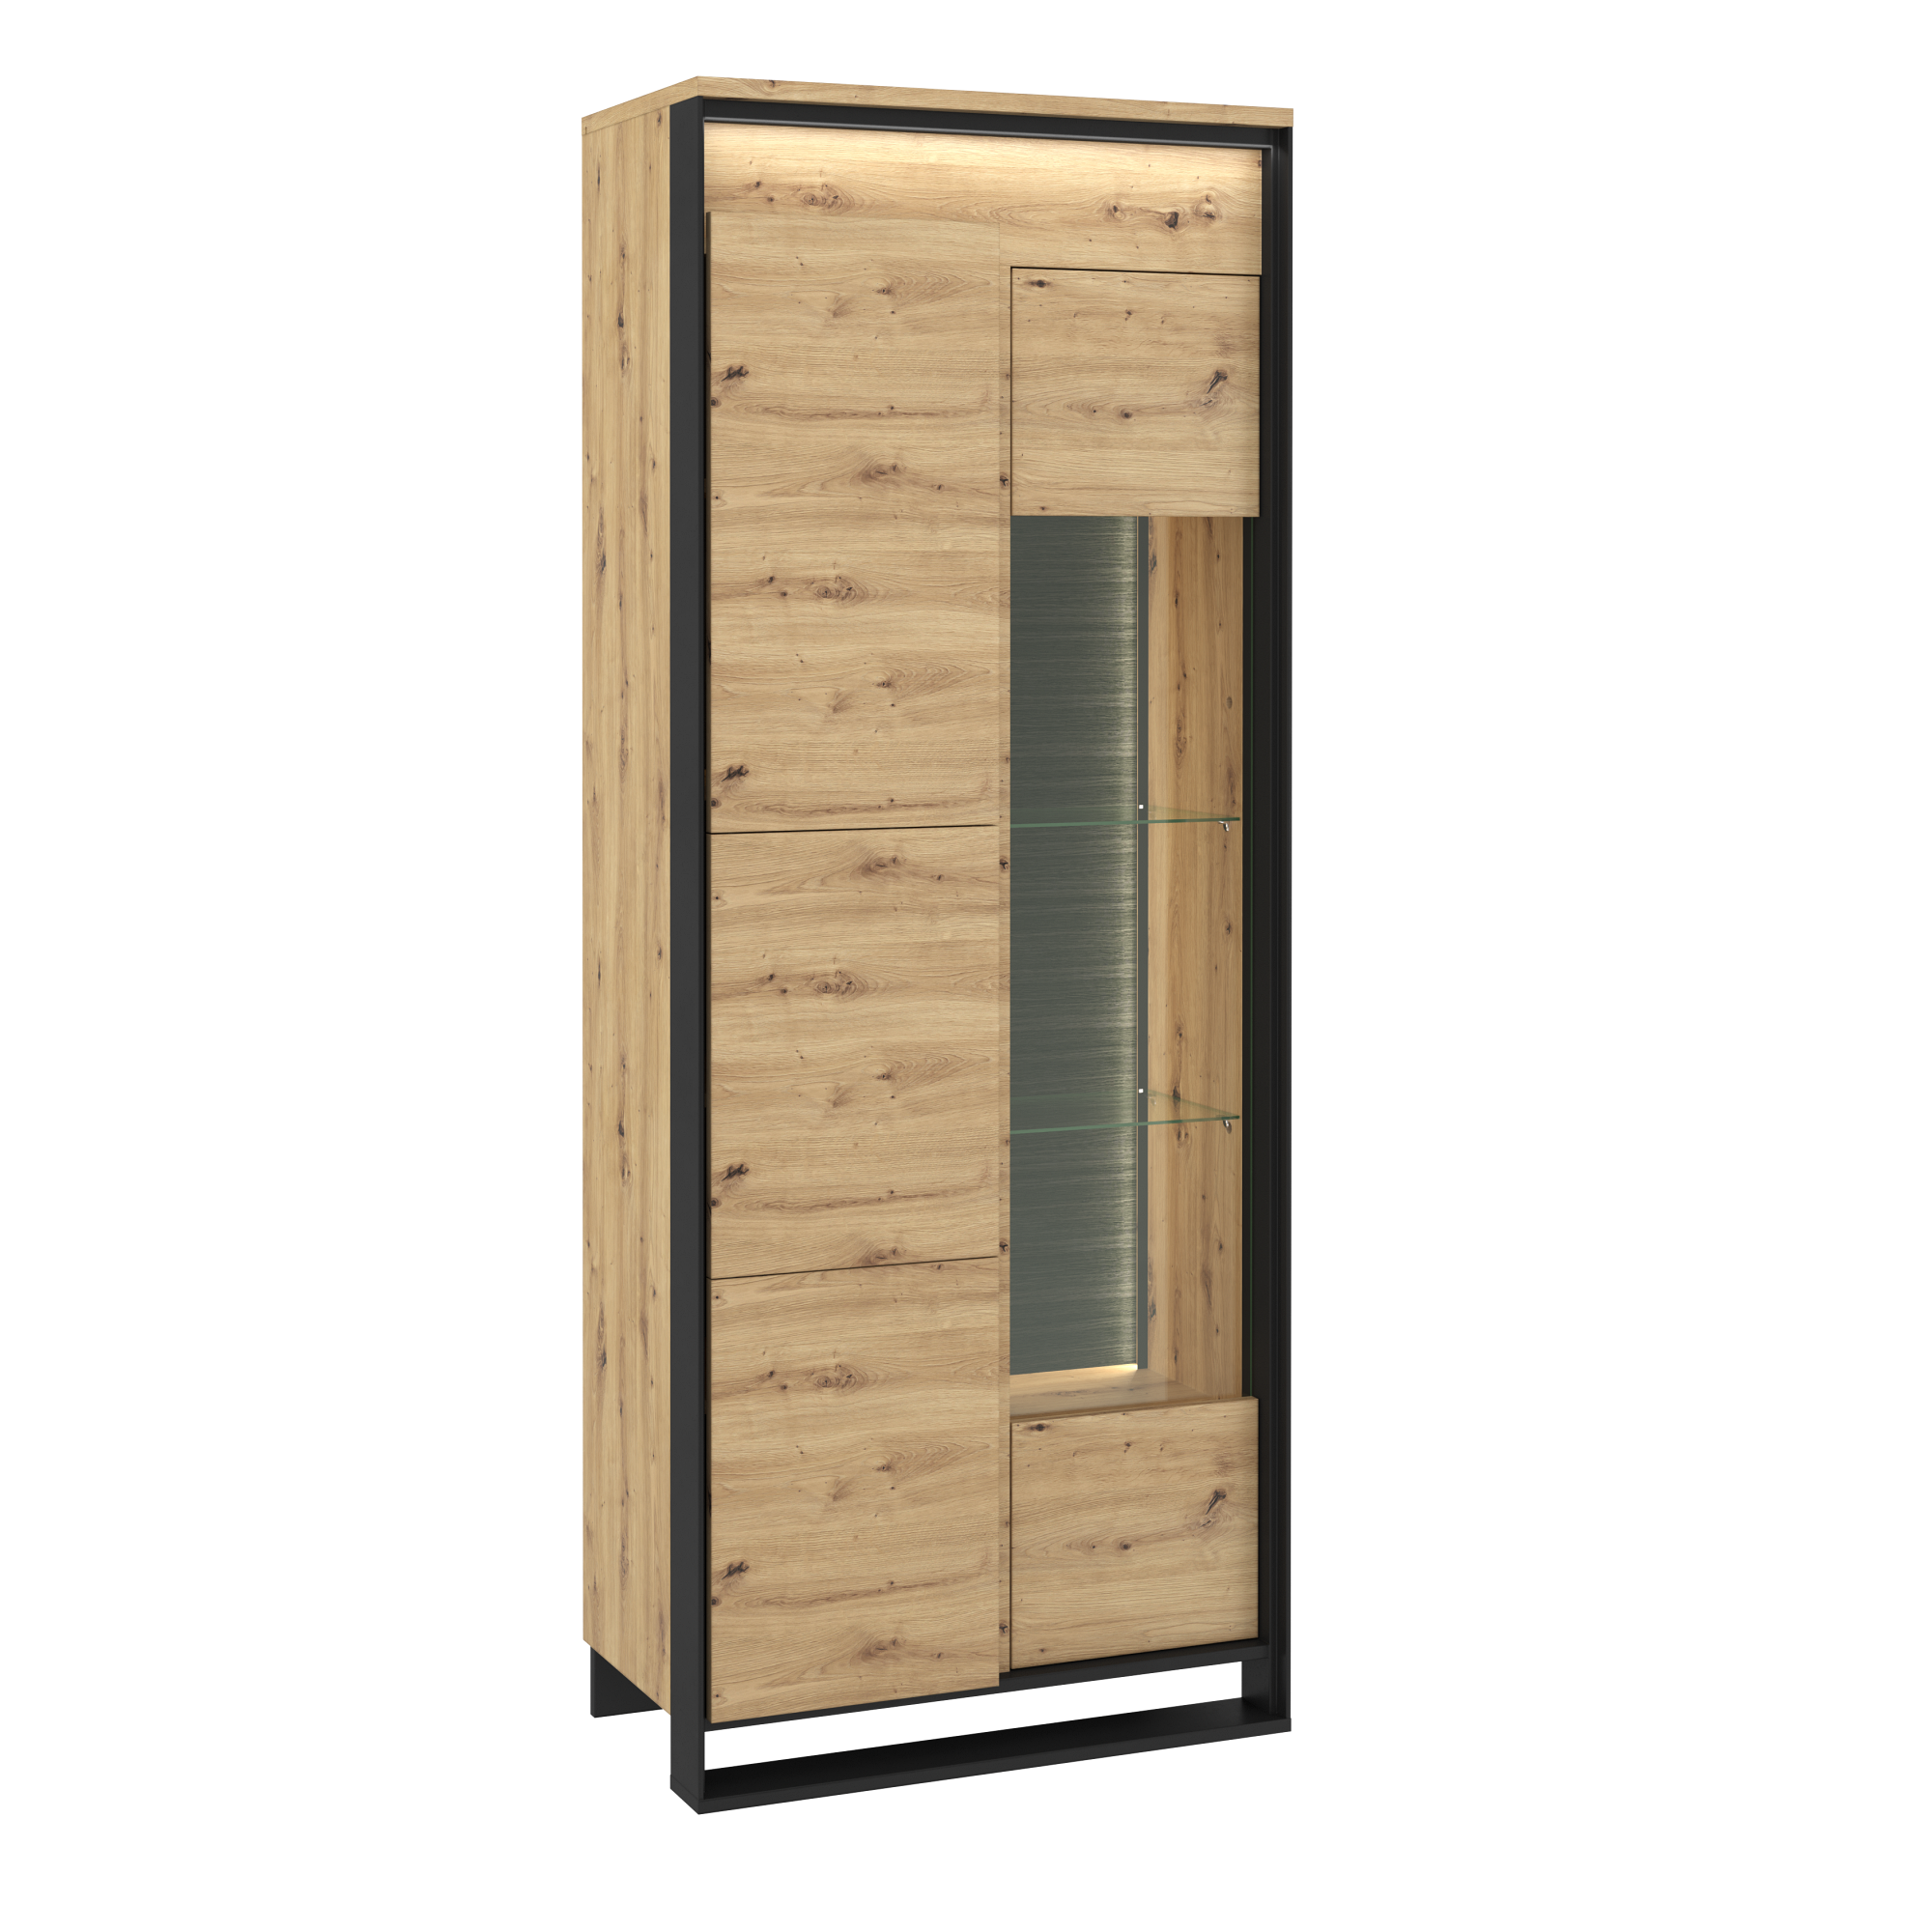 View Quant QA03 2 Doors Tall Display Cabinet information